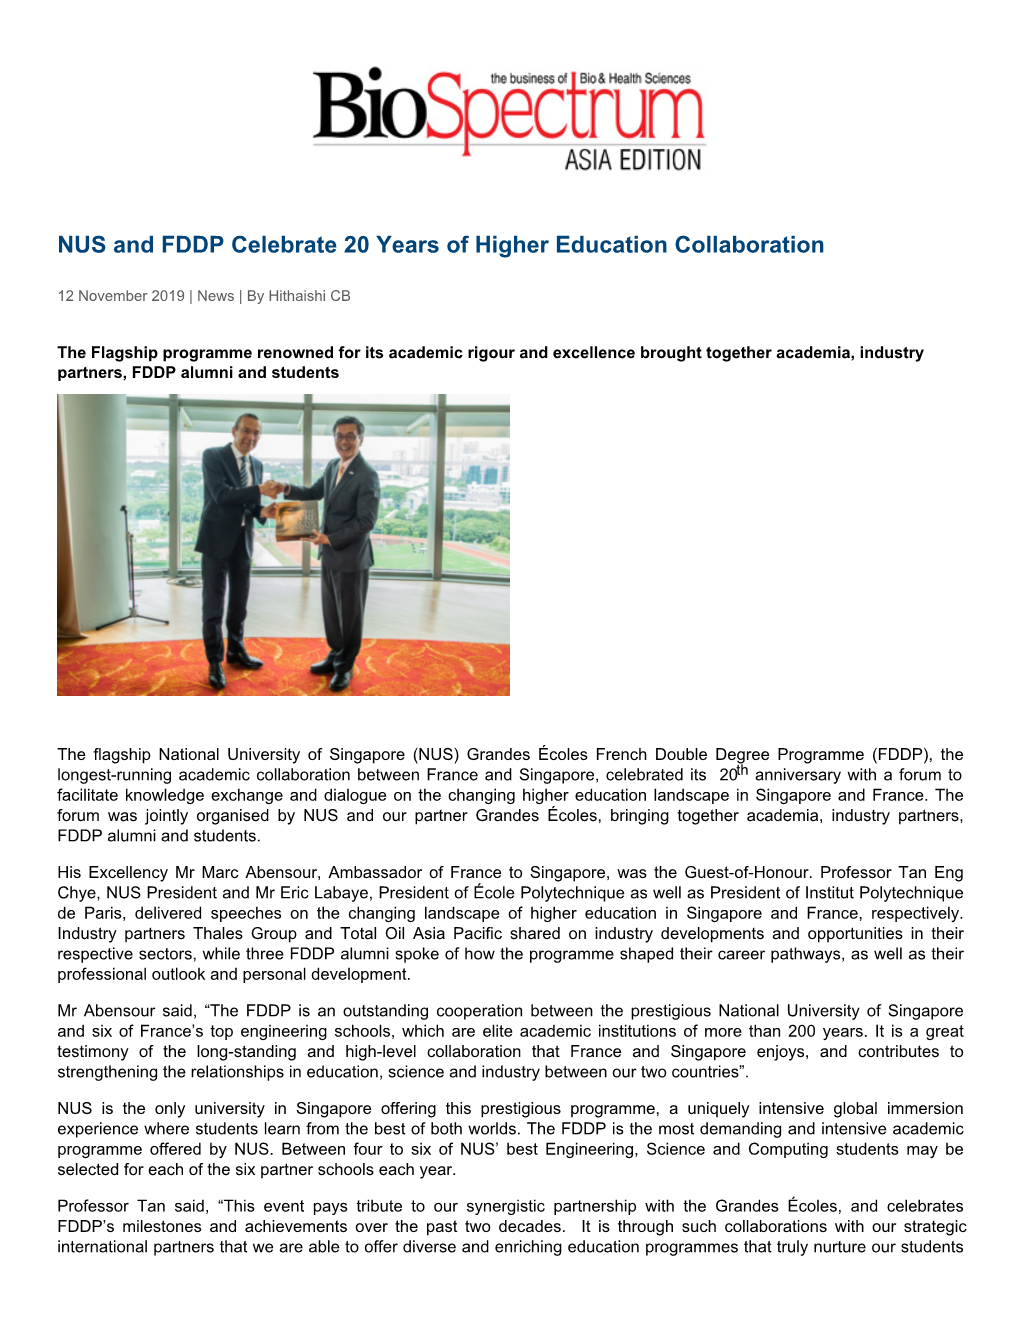 NUS and FDDP Celebrate 20 Years of Higher Education Collaboration